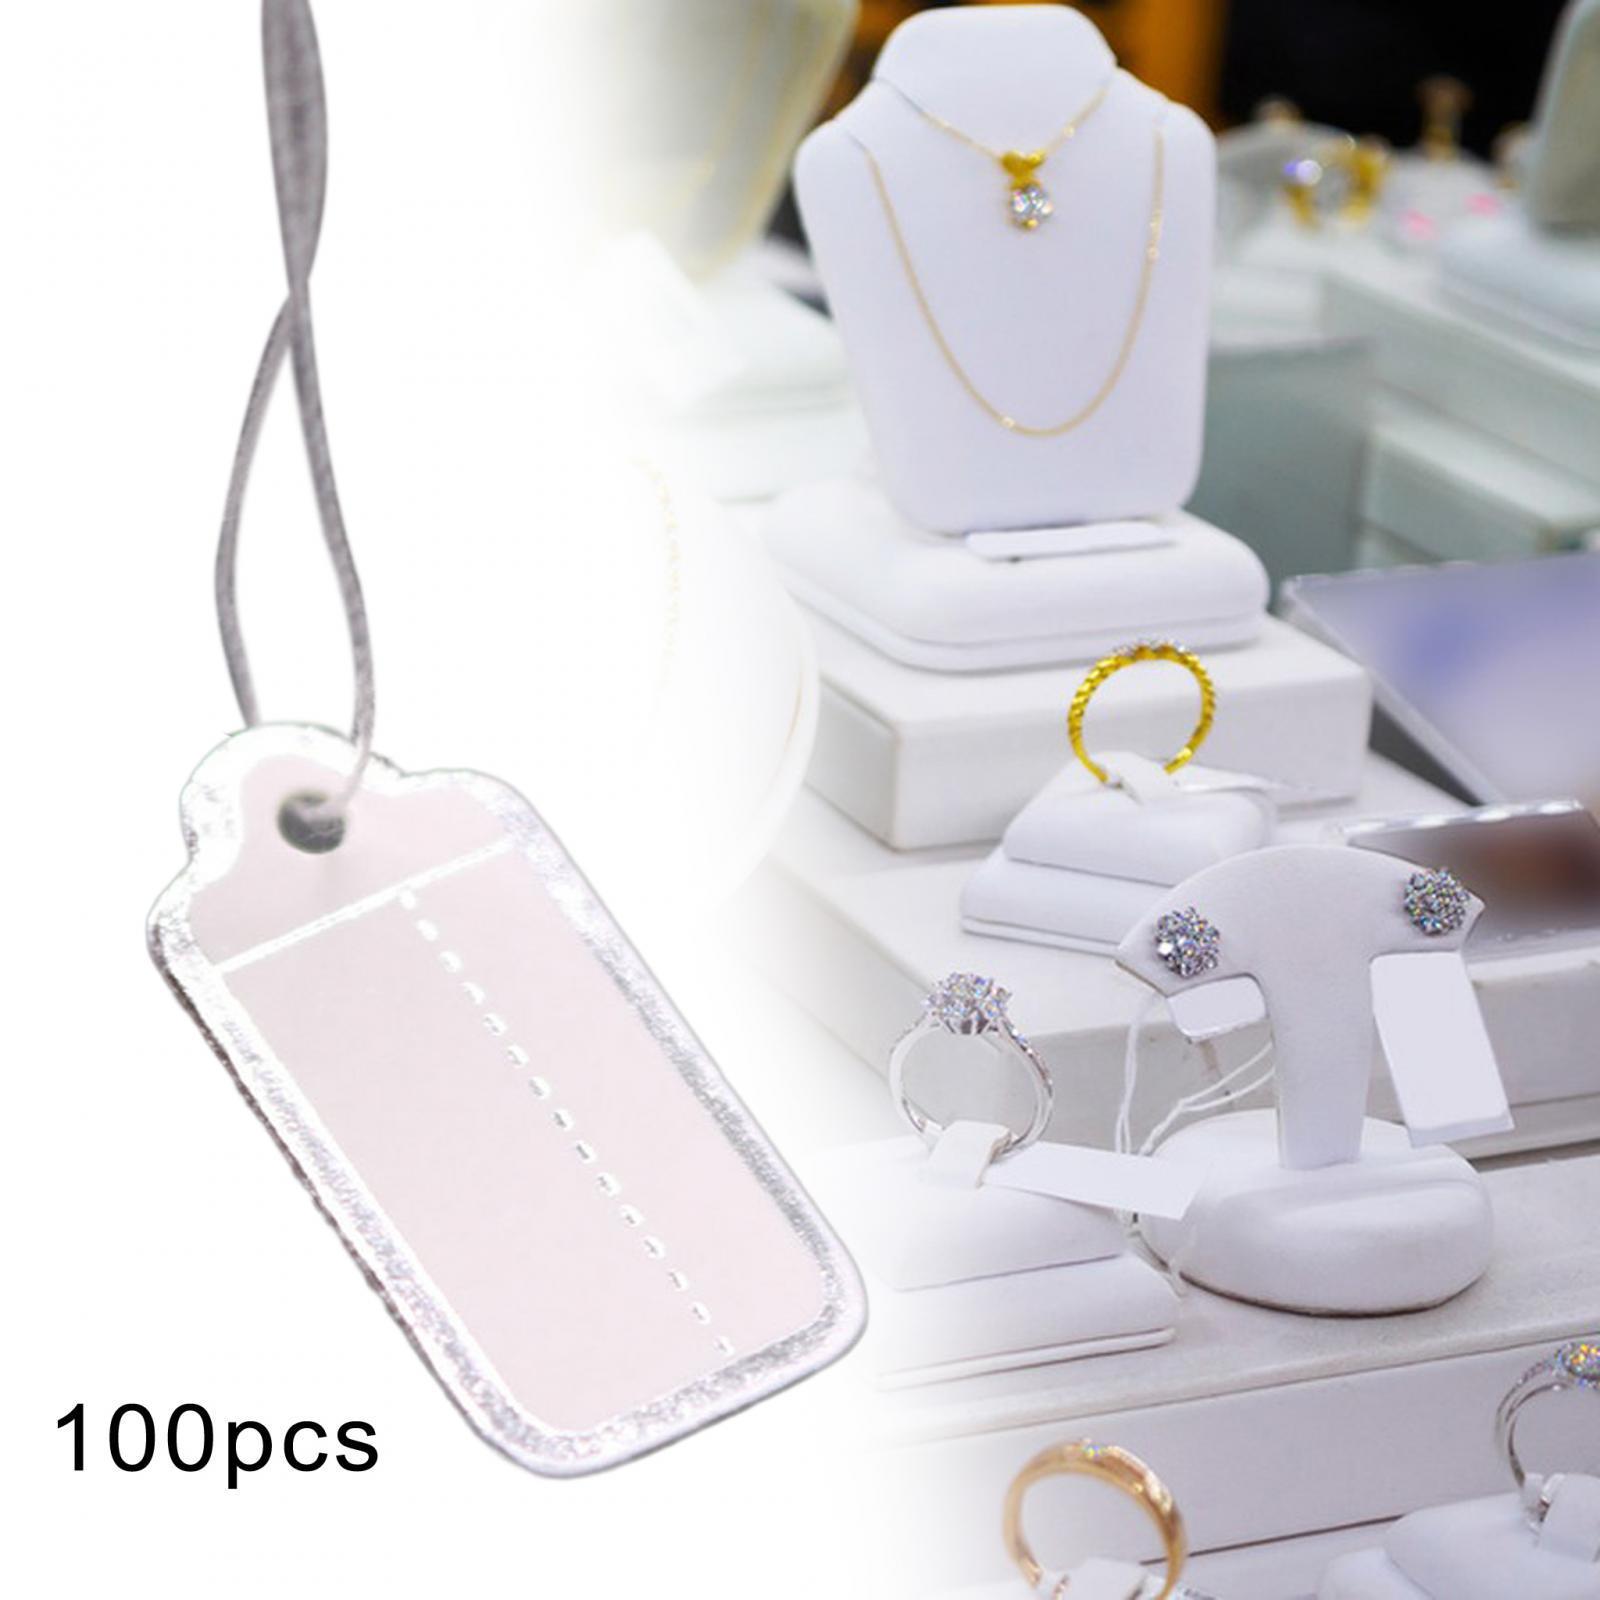 100x Price Tags Paper Tags Marking Strung Tags for Earrings Product Retail